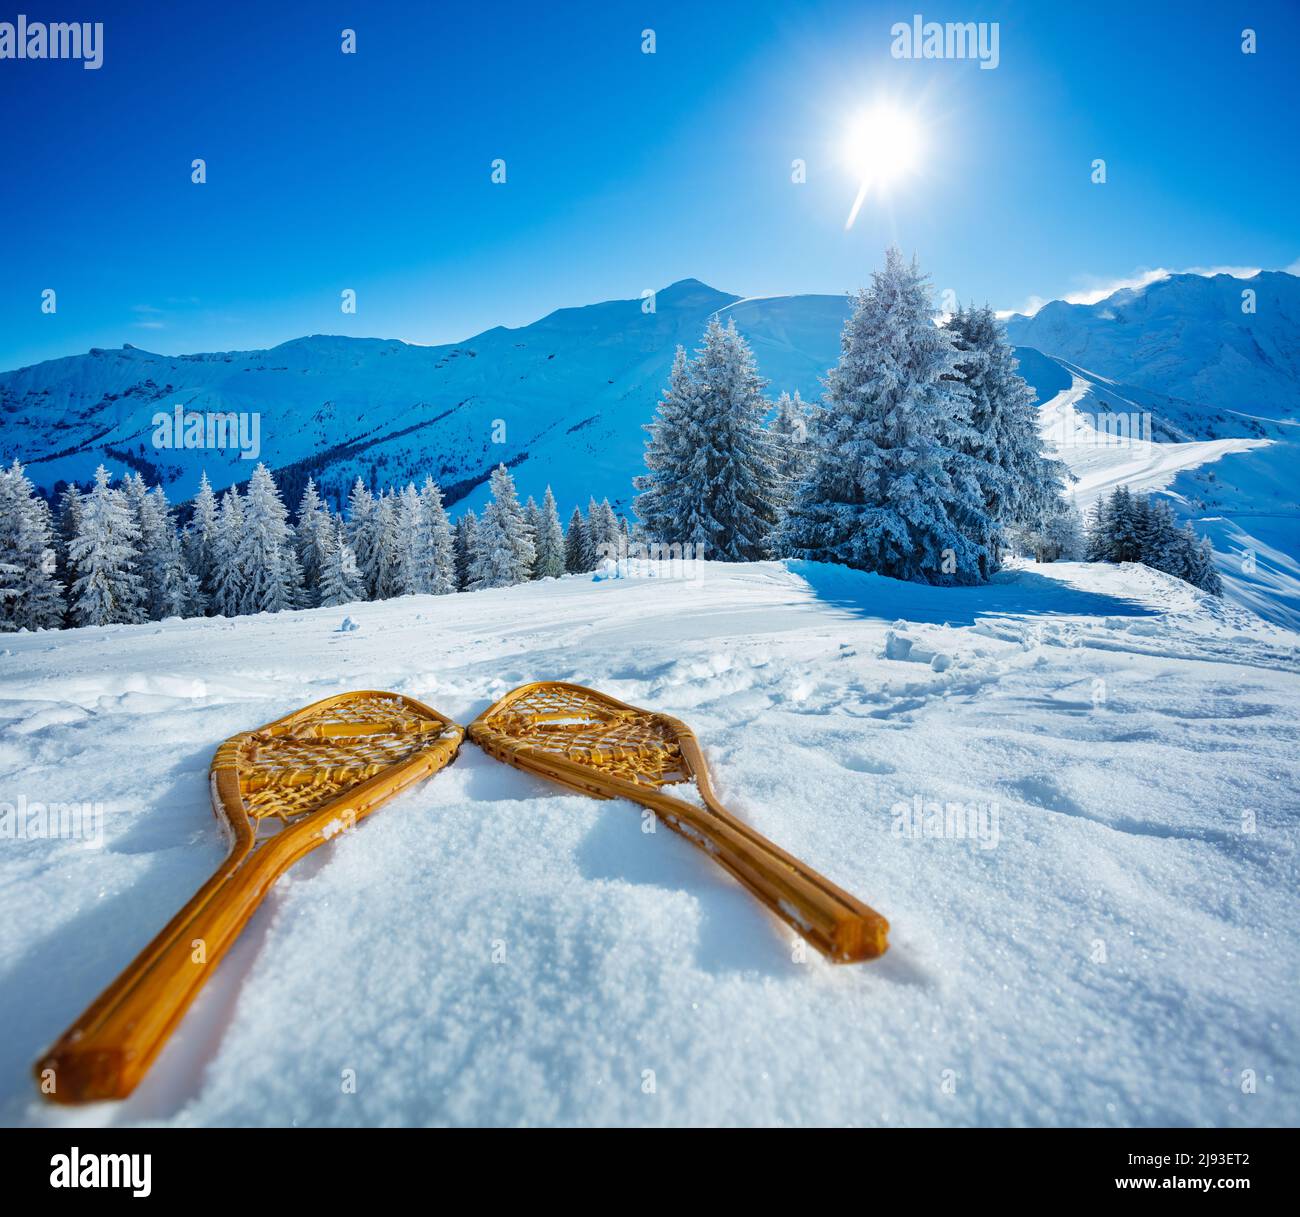 Wooden snowshoes in the snow over mountains and snowy forest Stock Photo